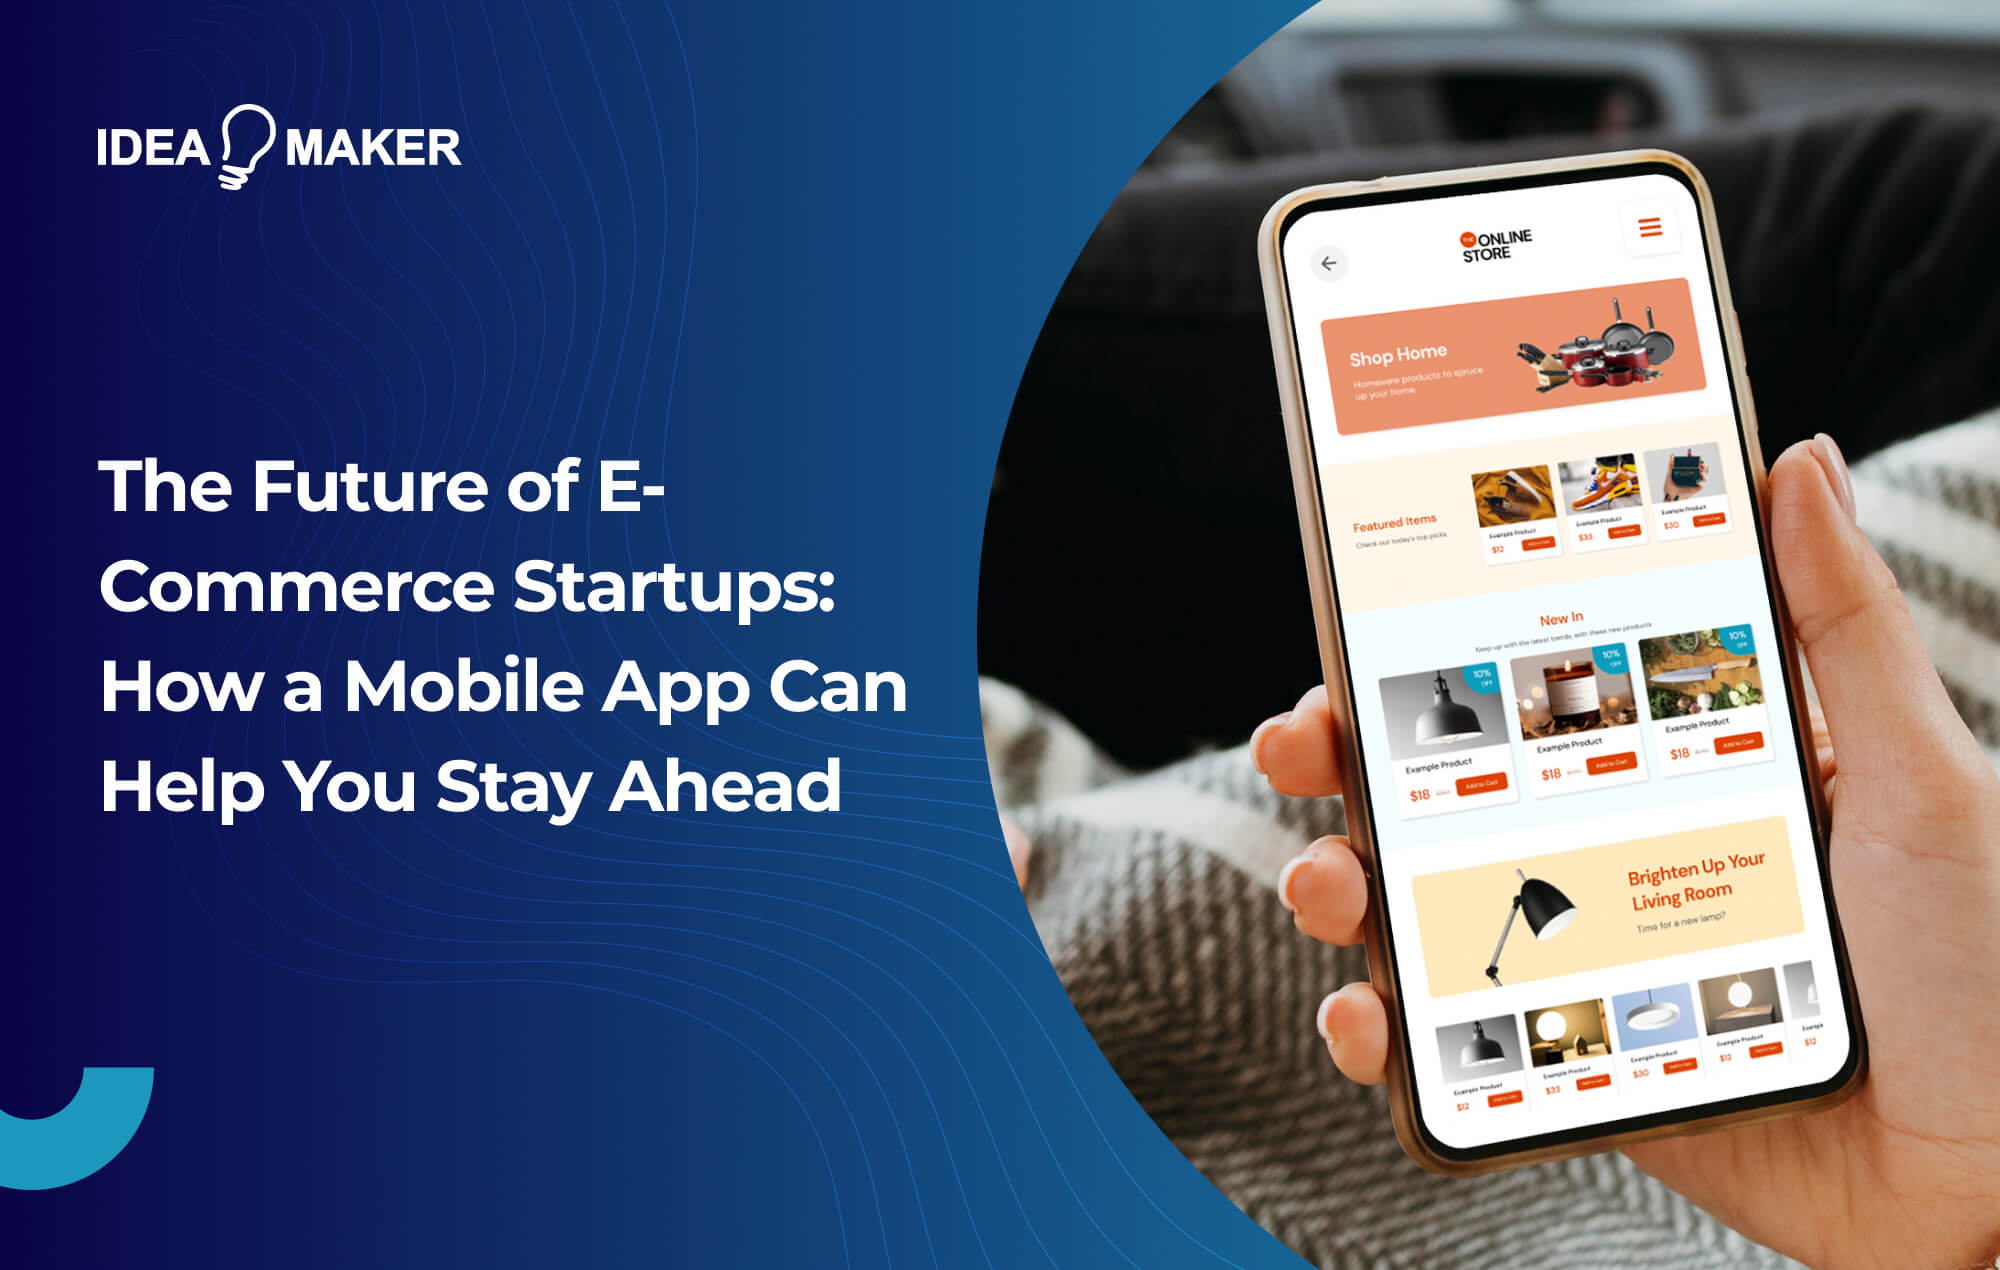 Ideamaker - The Future of E-Commerce Startups_ How a Mobile App Can Help You Stay Ahead